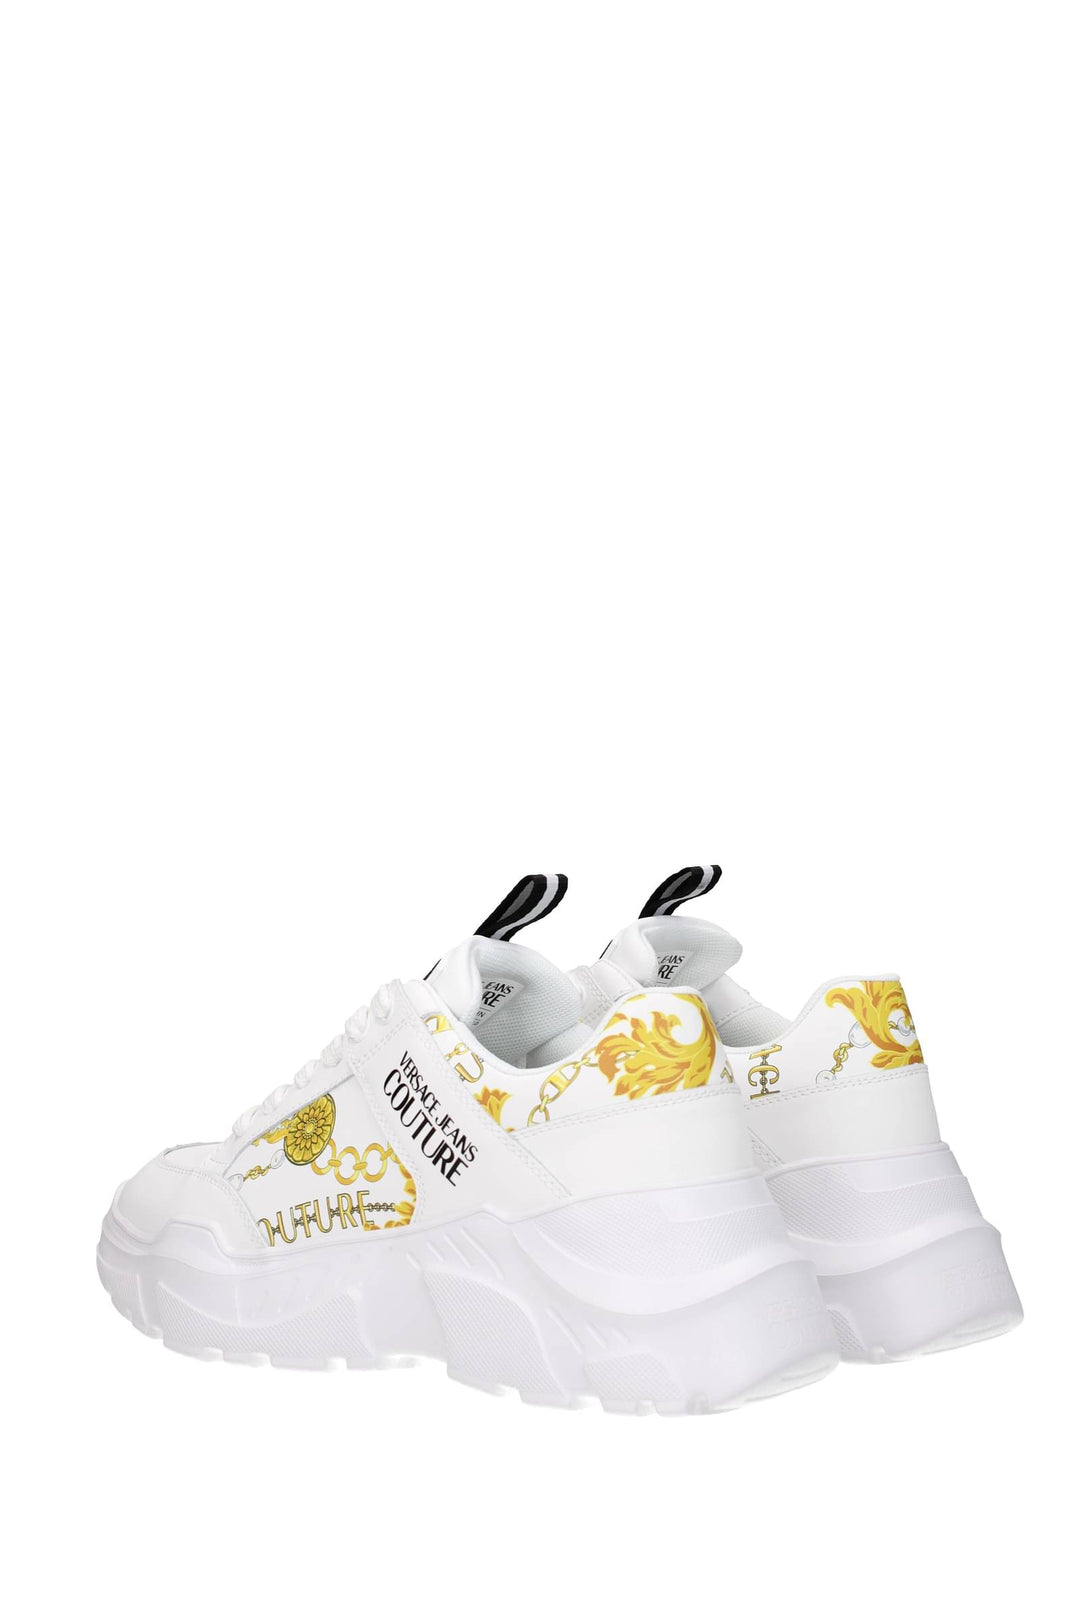 Versace Jeans Sneakers Couture Pelle Bianco Oro - Versace Jeans Couture - Uomo